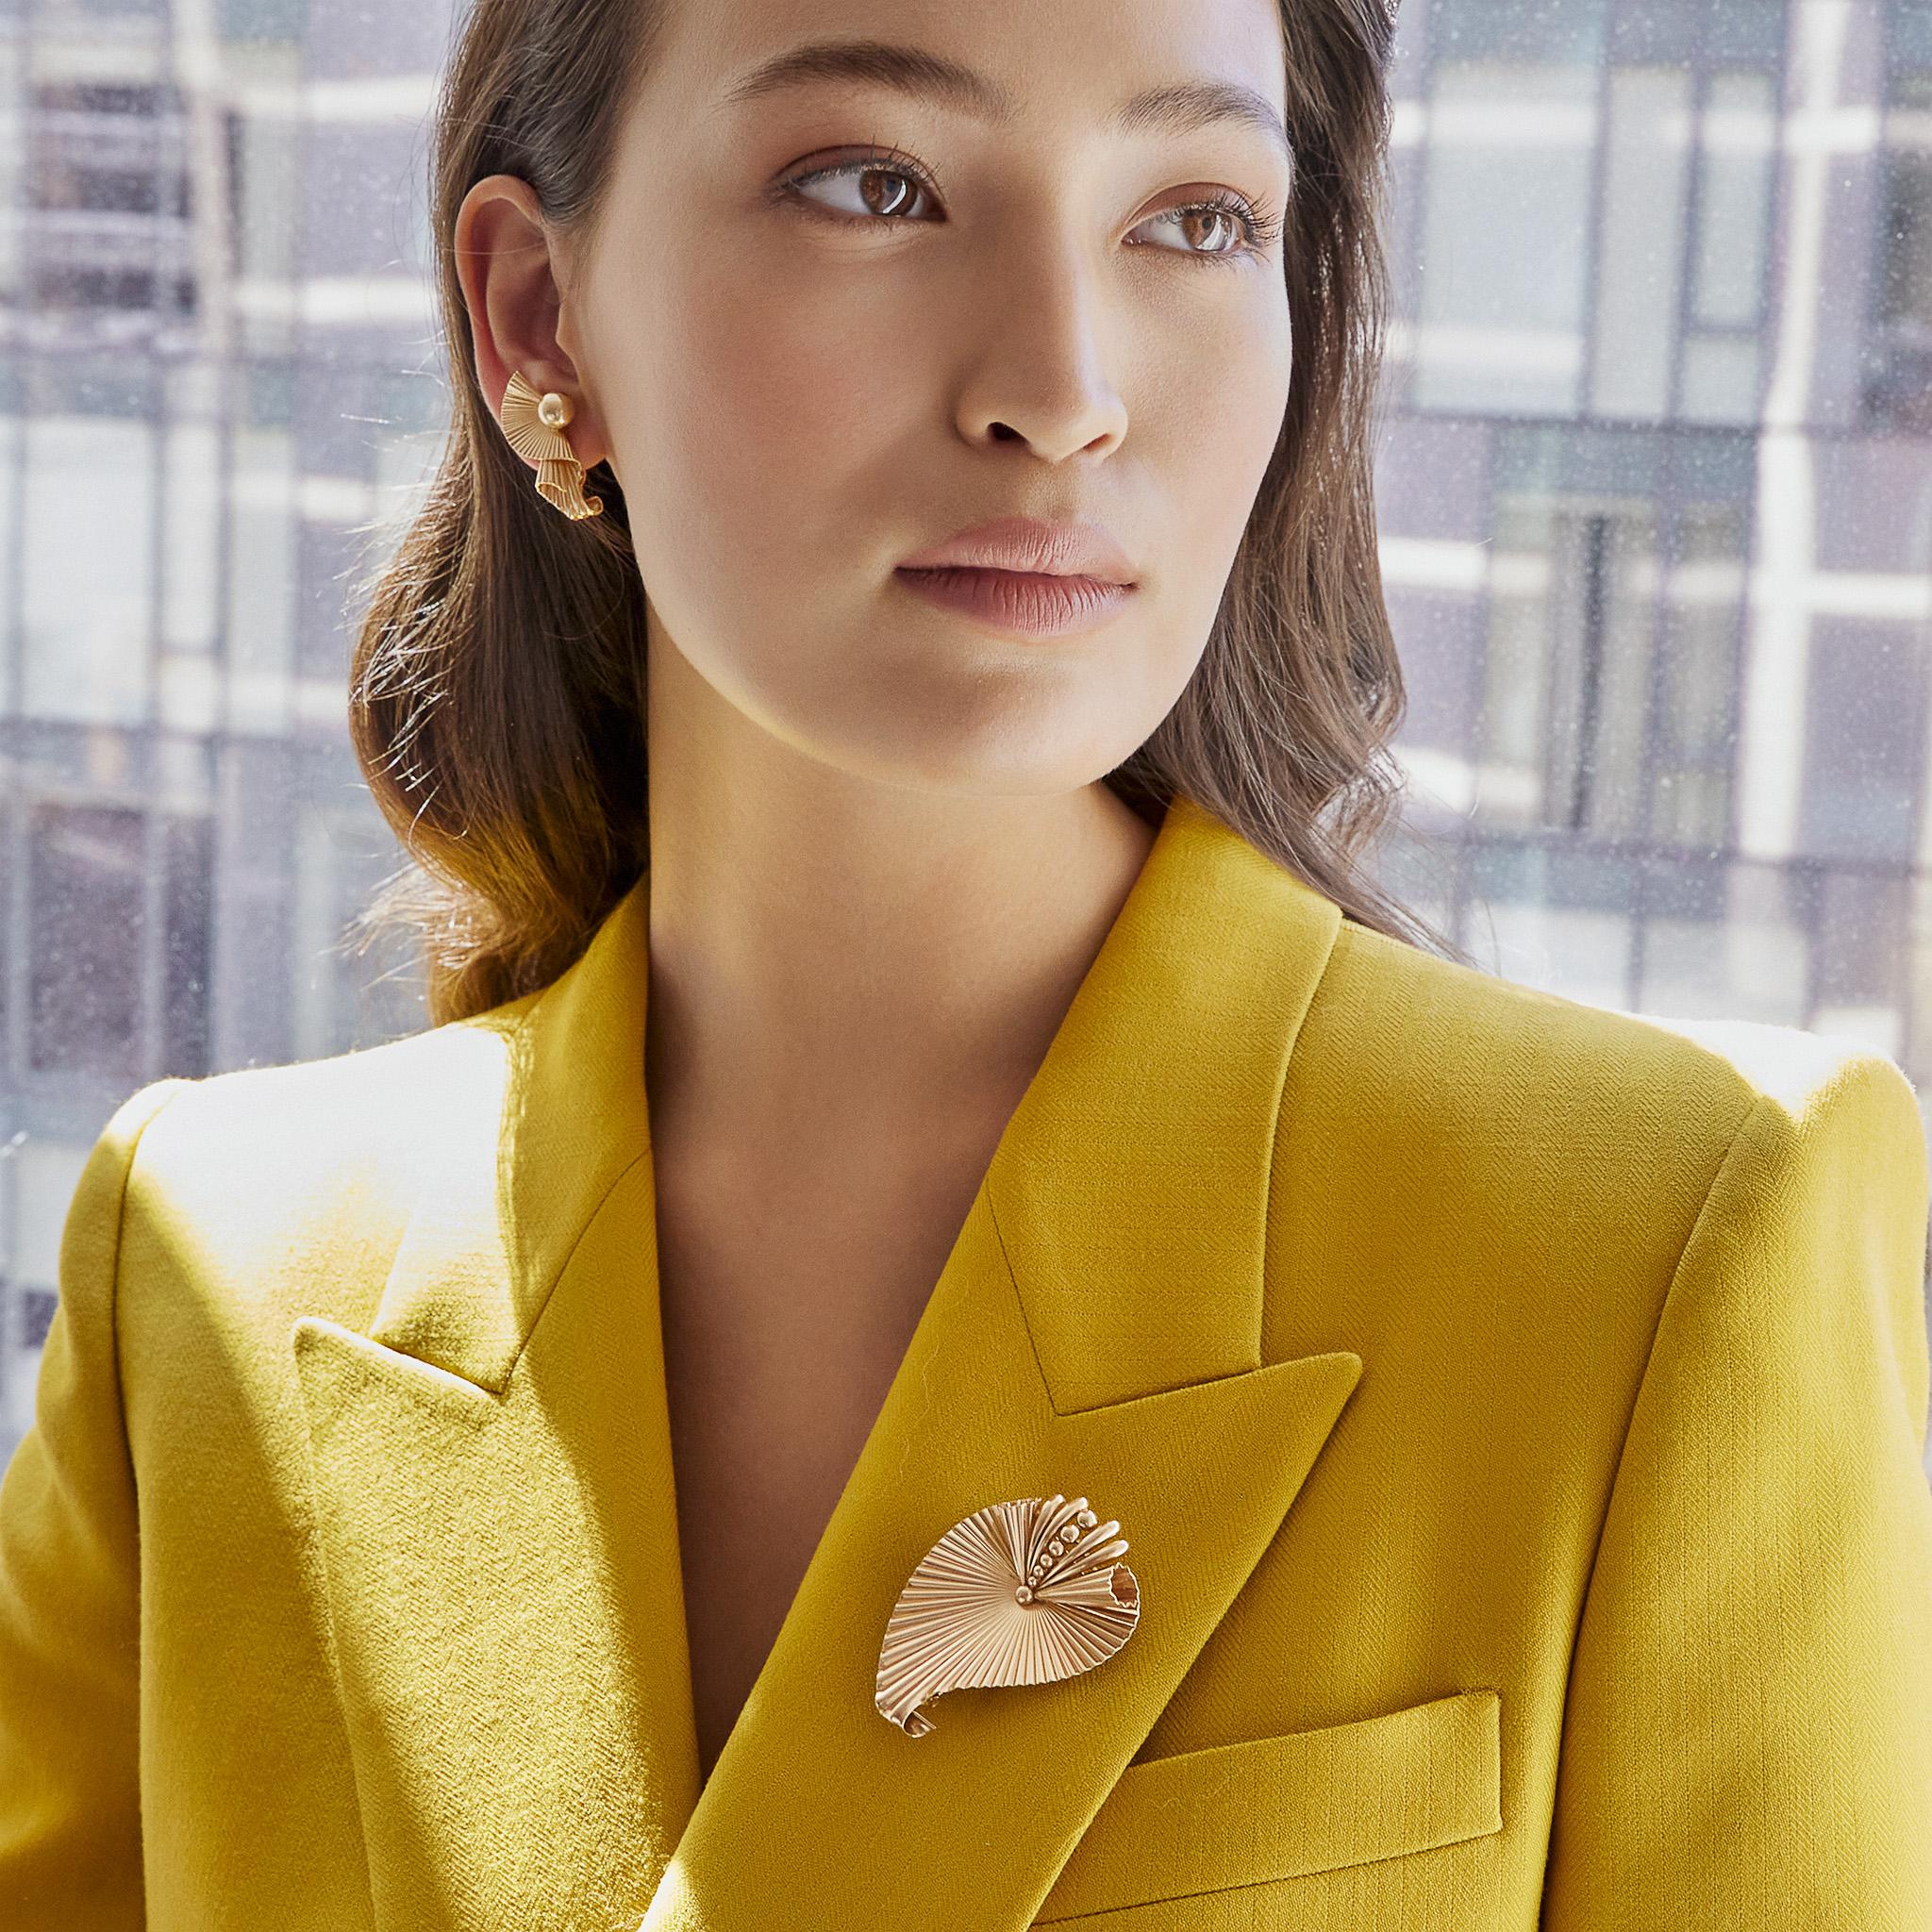 These Retro clip earrings and brooch are composed of 14K gold. The clip earrings are designed as ridged ribbons suspended from a domed ball top curling back upon themselves, while the brooch is a ribbed, scrolling leaf topped by volutes and a